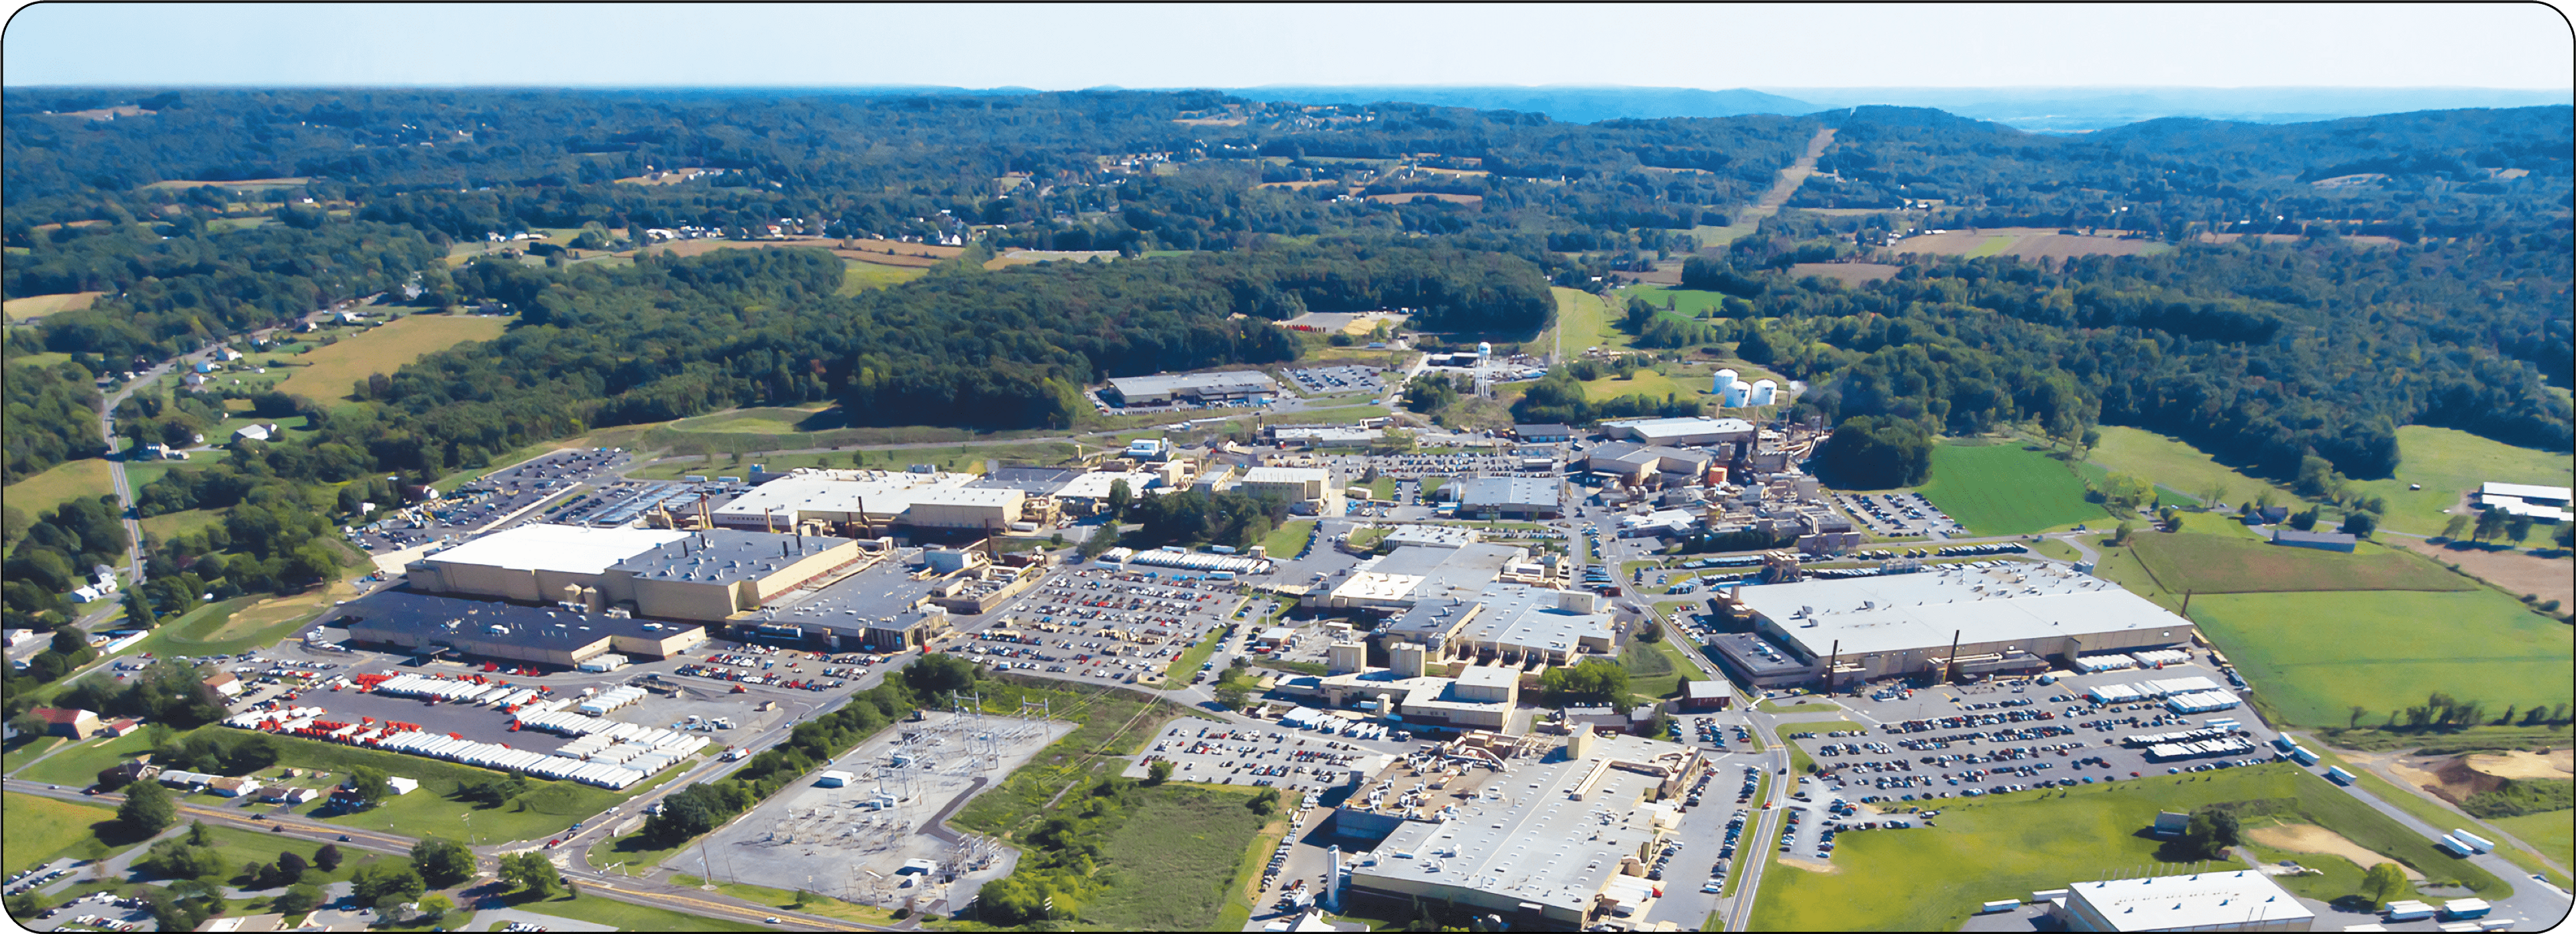 Bird's eye view picture of East Penn manufacturing facility